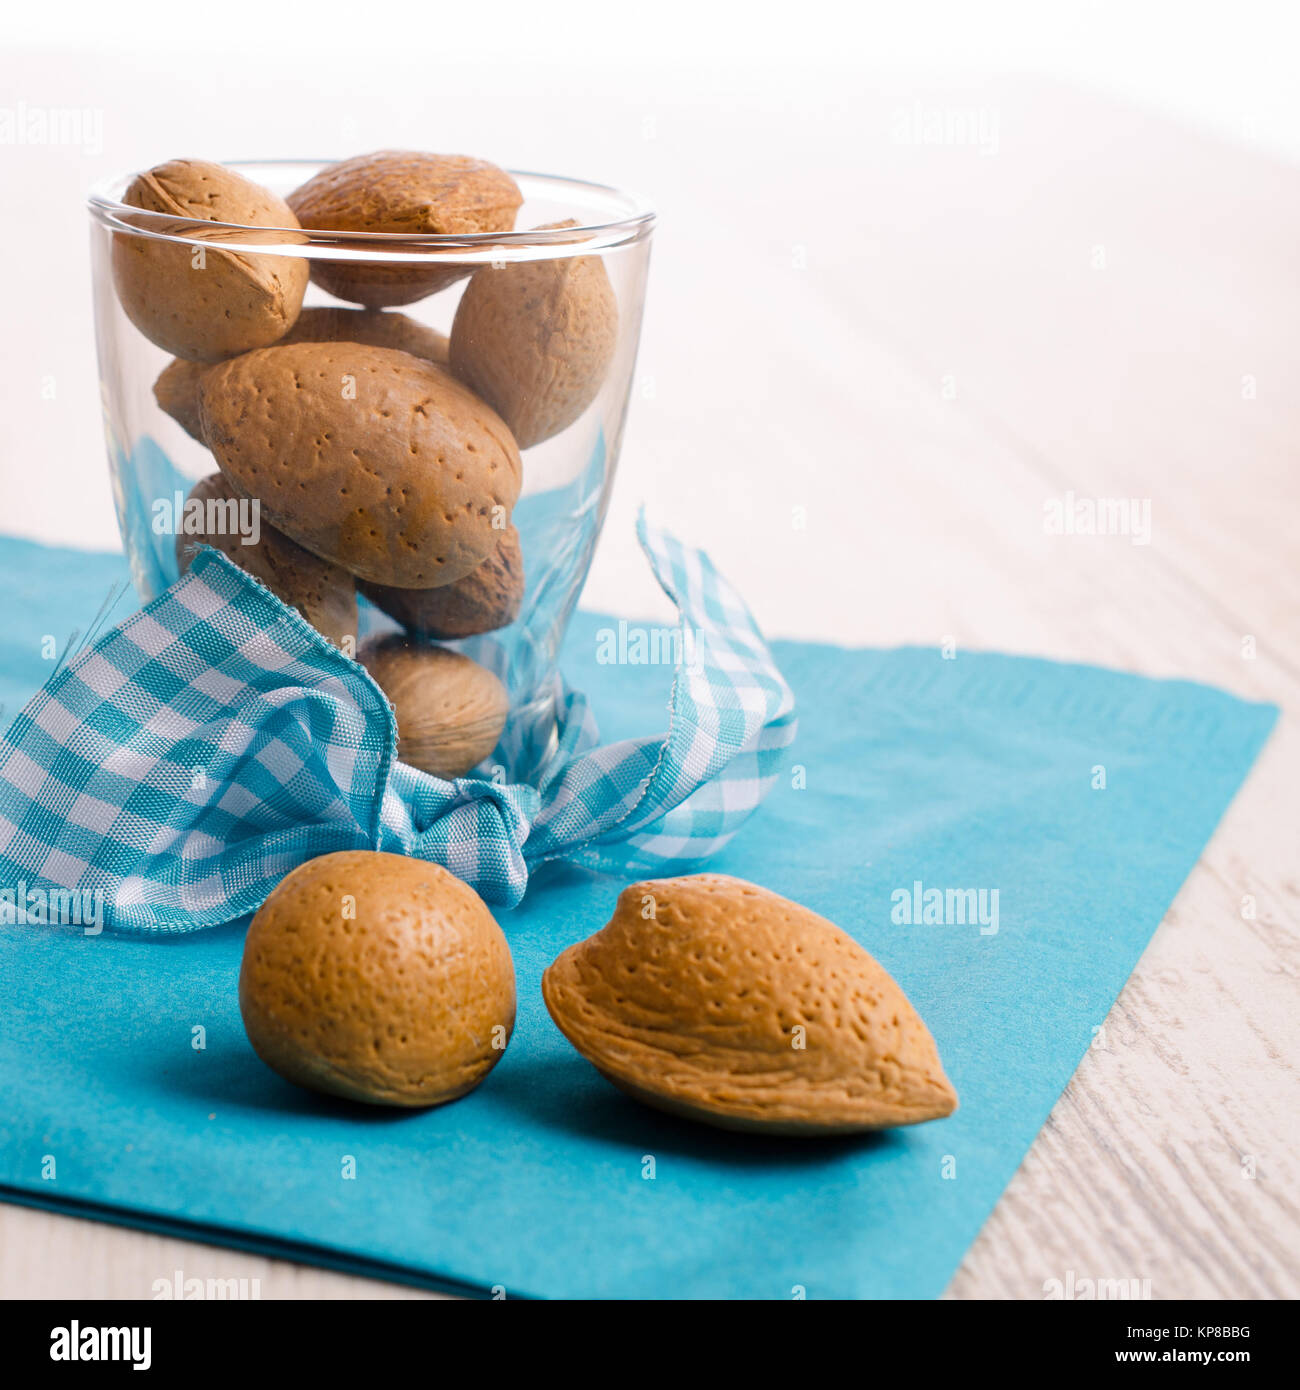 Almonds in a glass Stock Photo